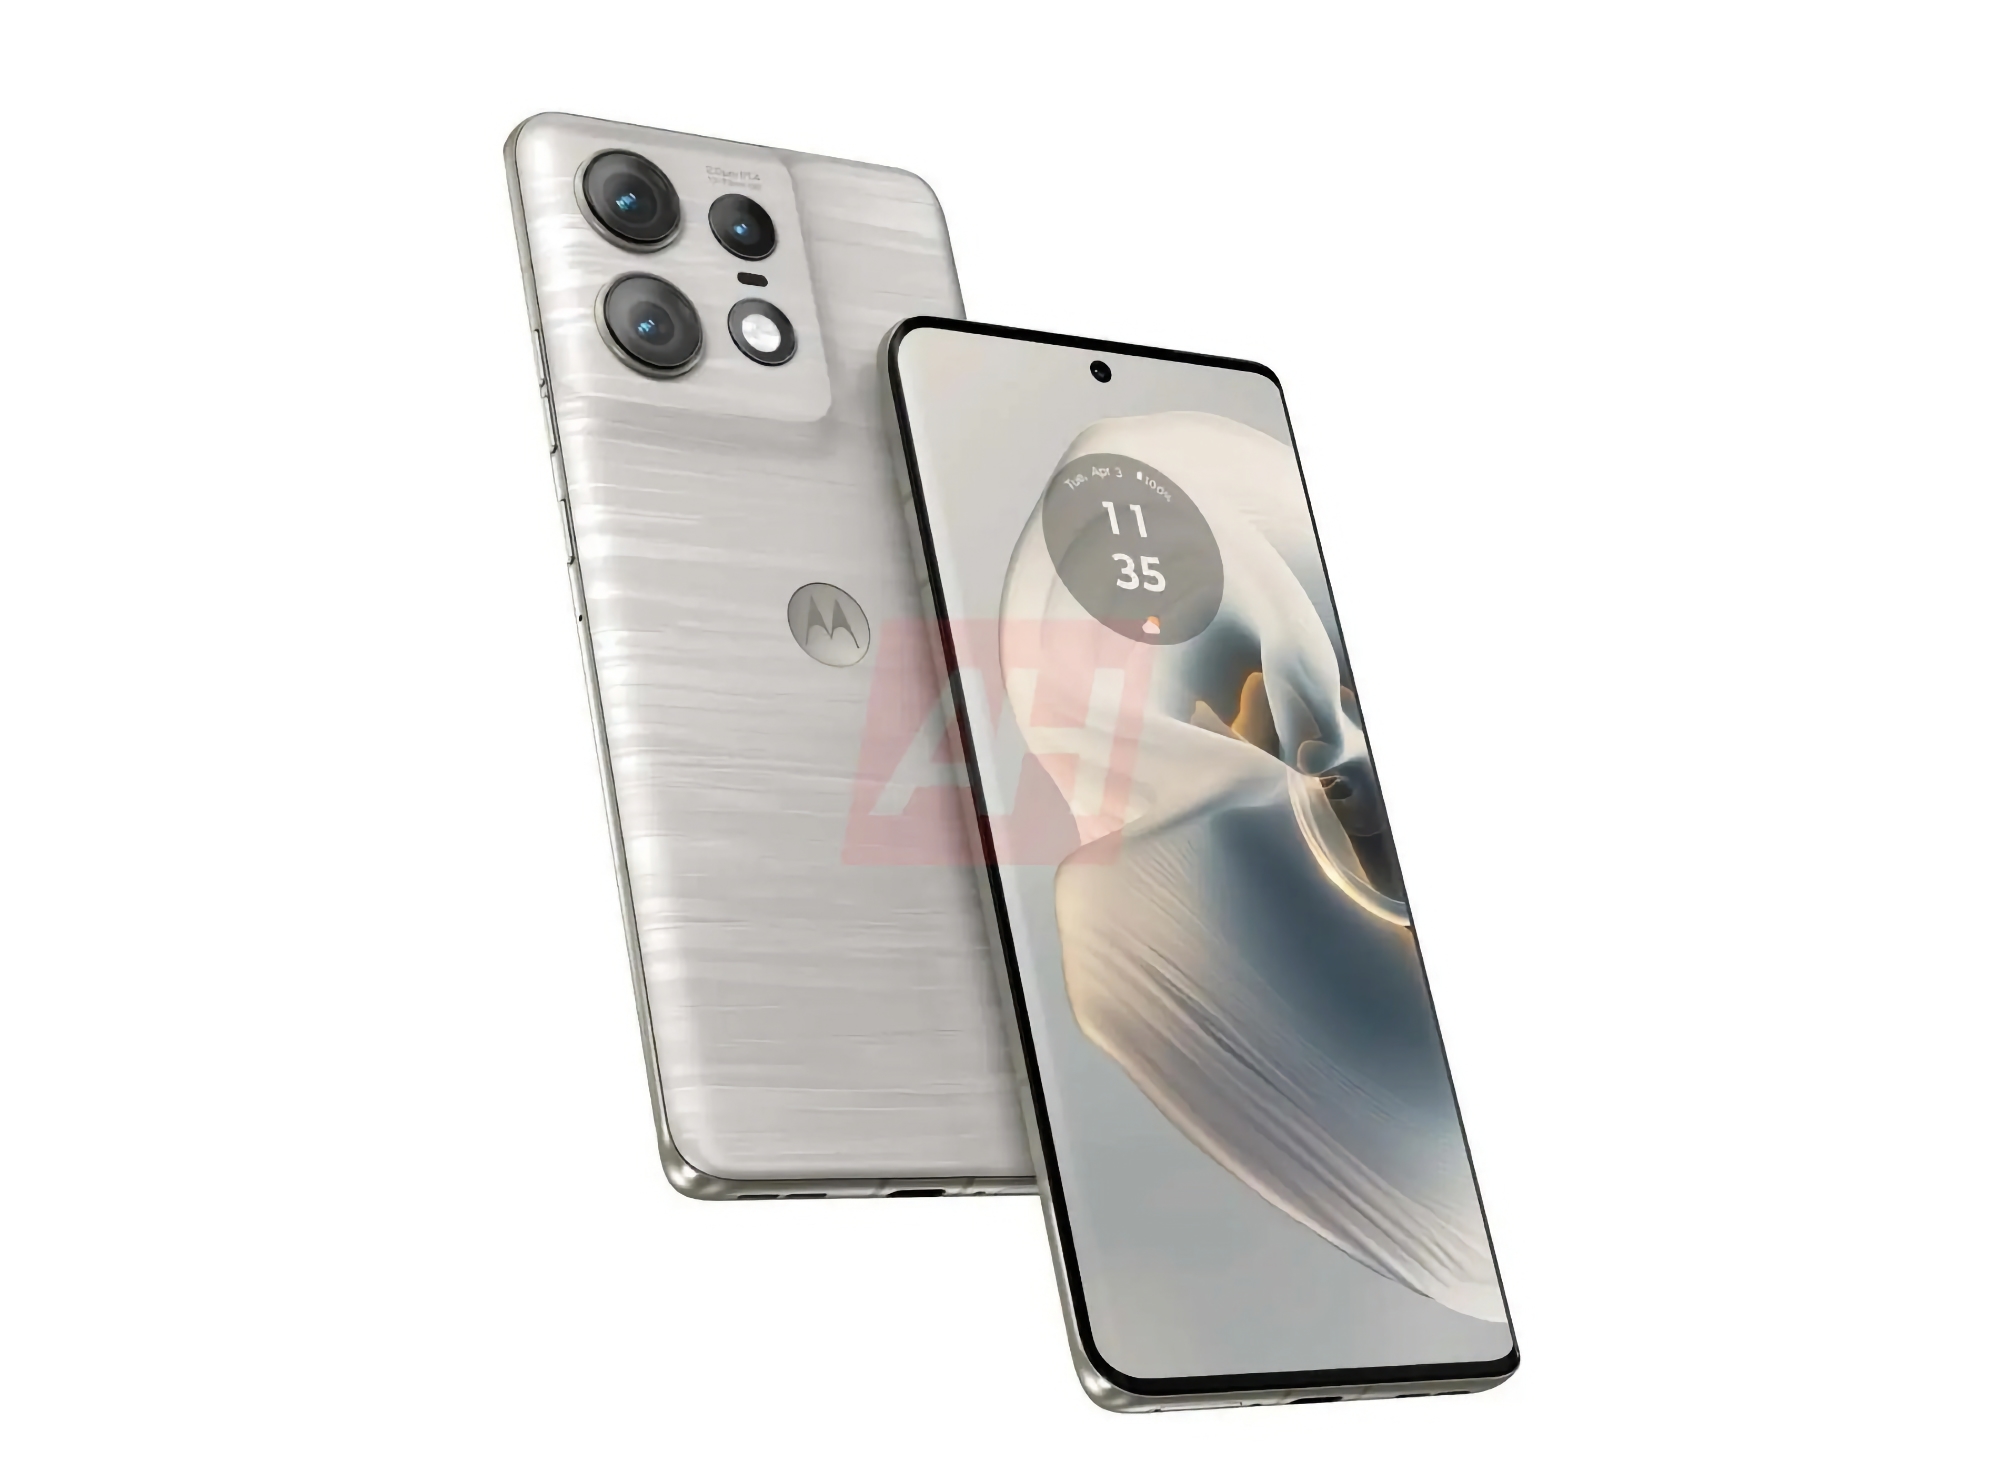 Not just the Edge 50 Pro: Motorola is preparing to release the Edge 50 Fusion with an OLED display, Snapdragon 6 Gen 1 chip and 256GB of storage